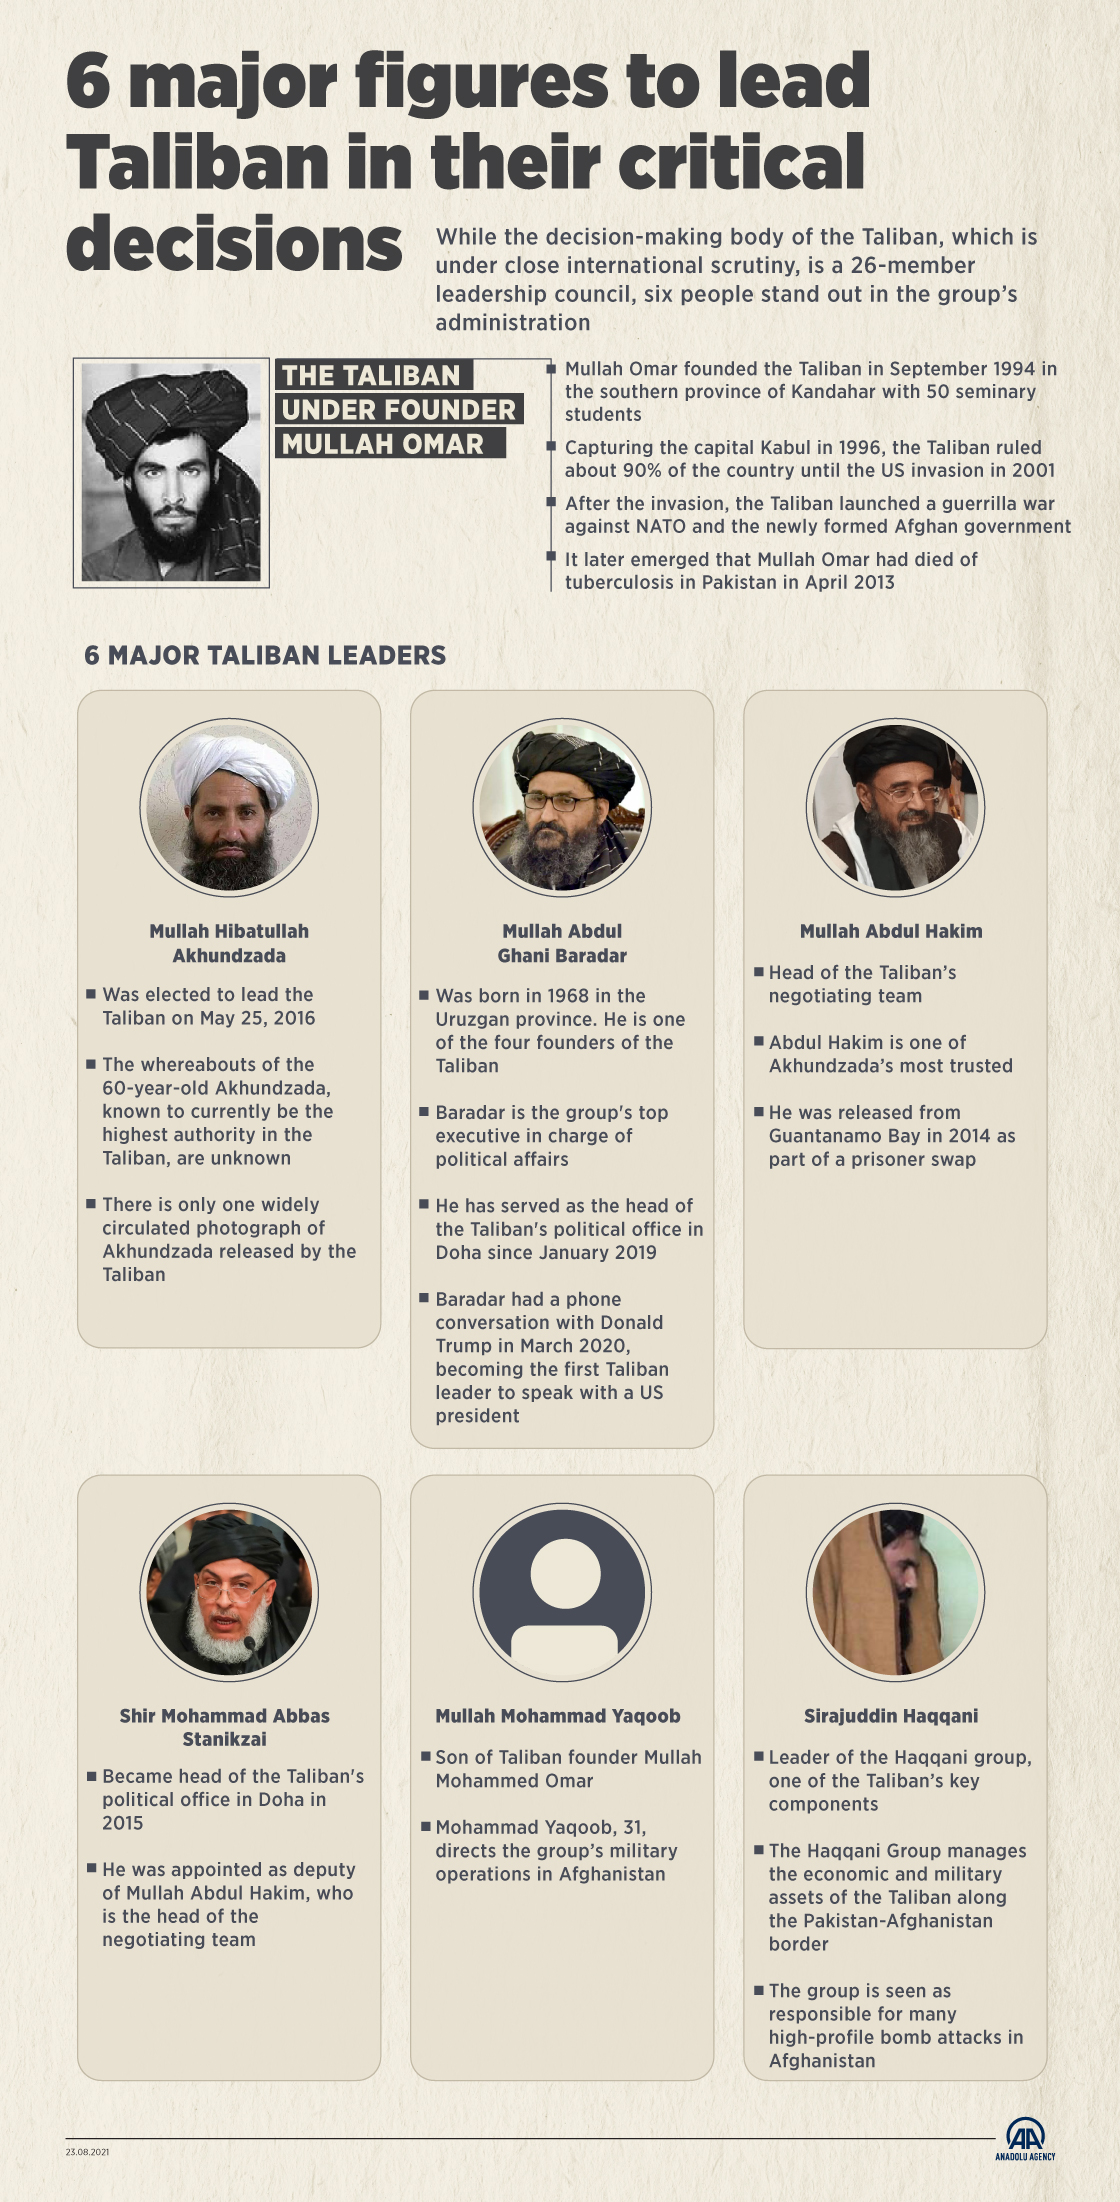 6-major-figures-to-lead-Taliban-in-its-critical-decisions.jpg